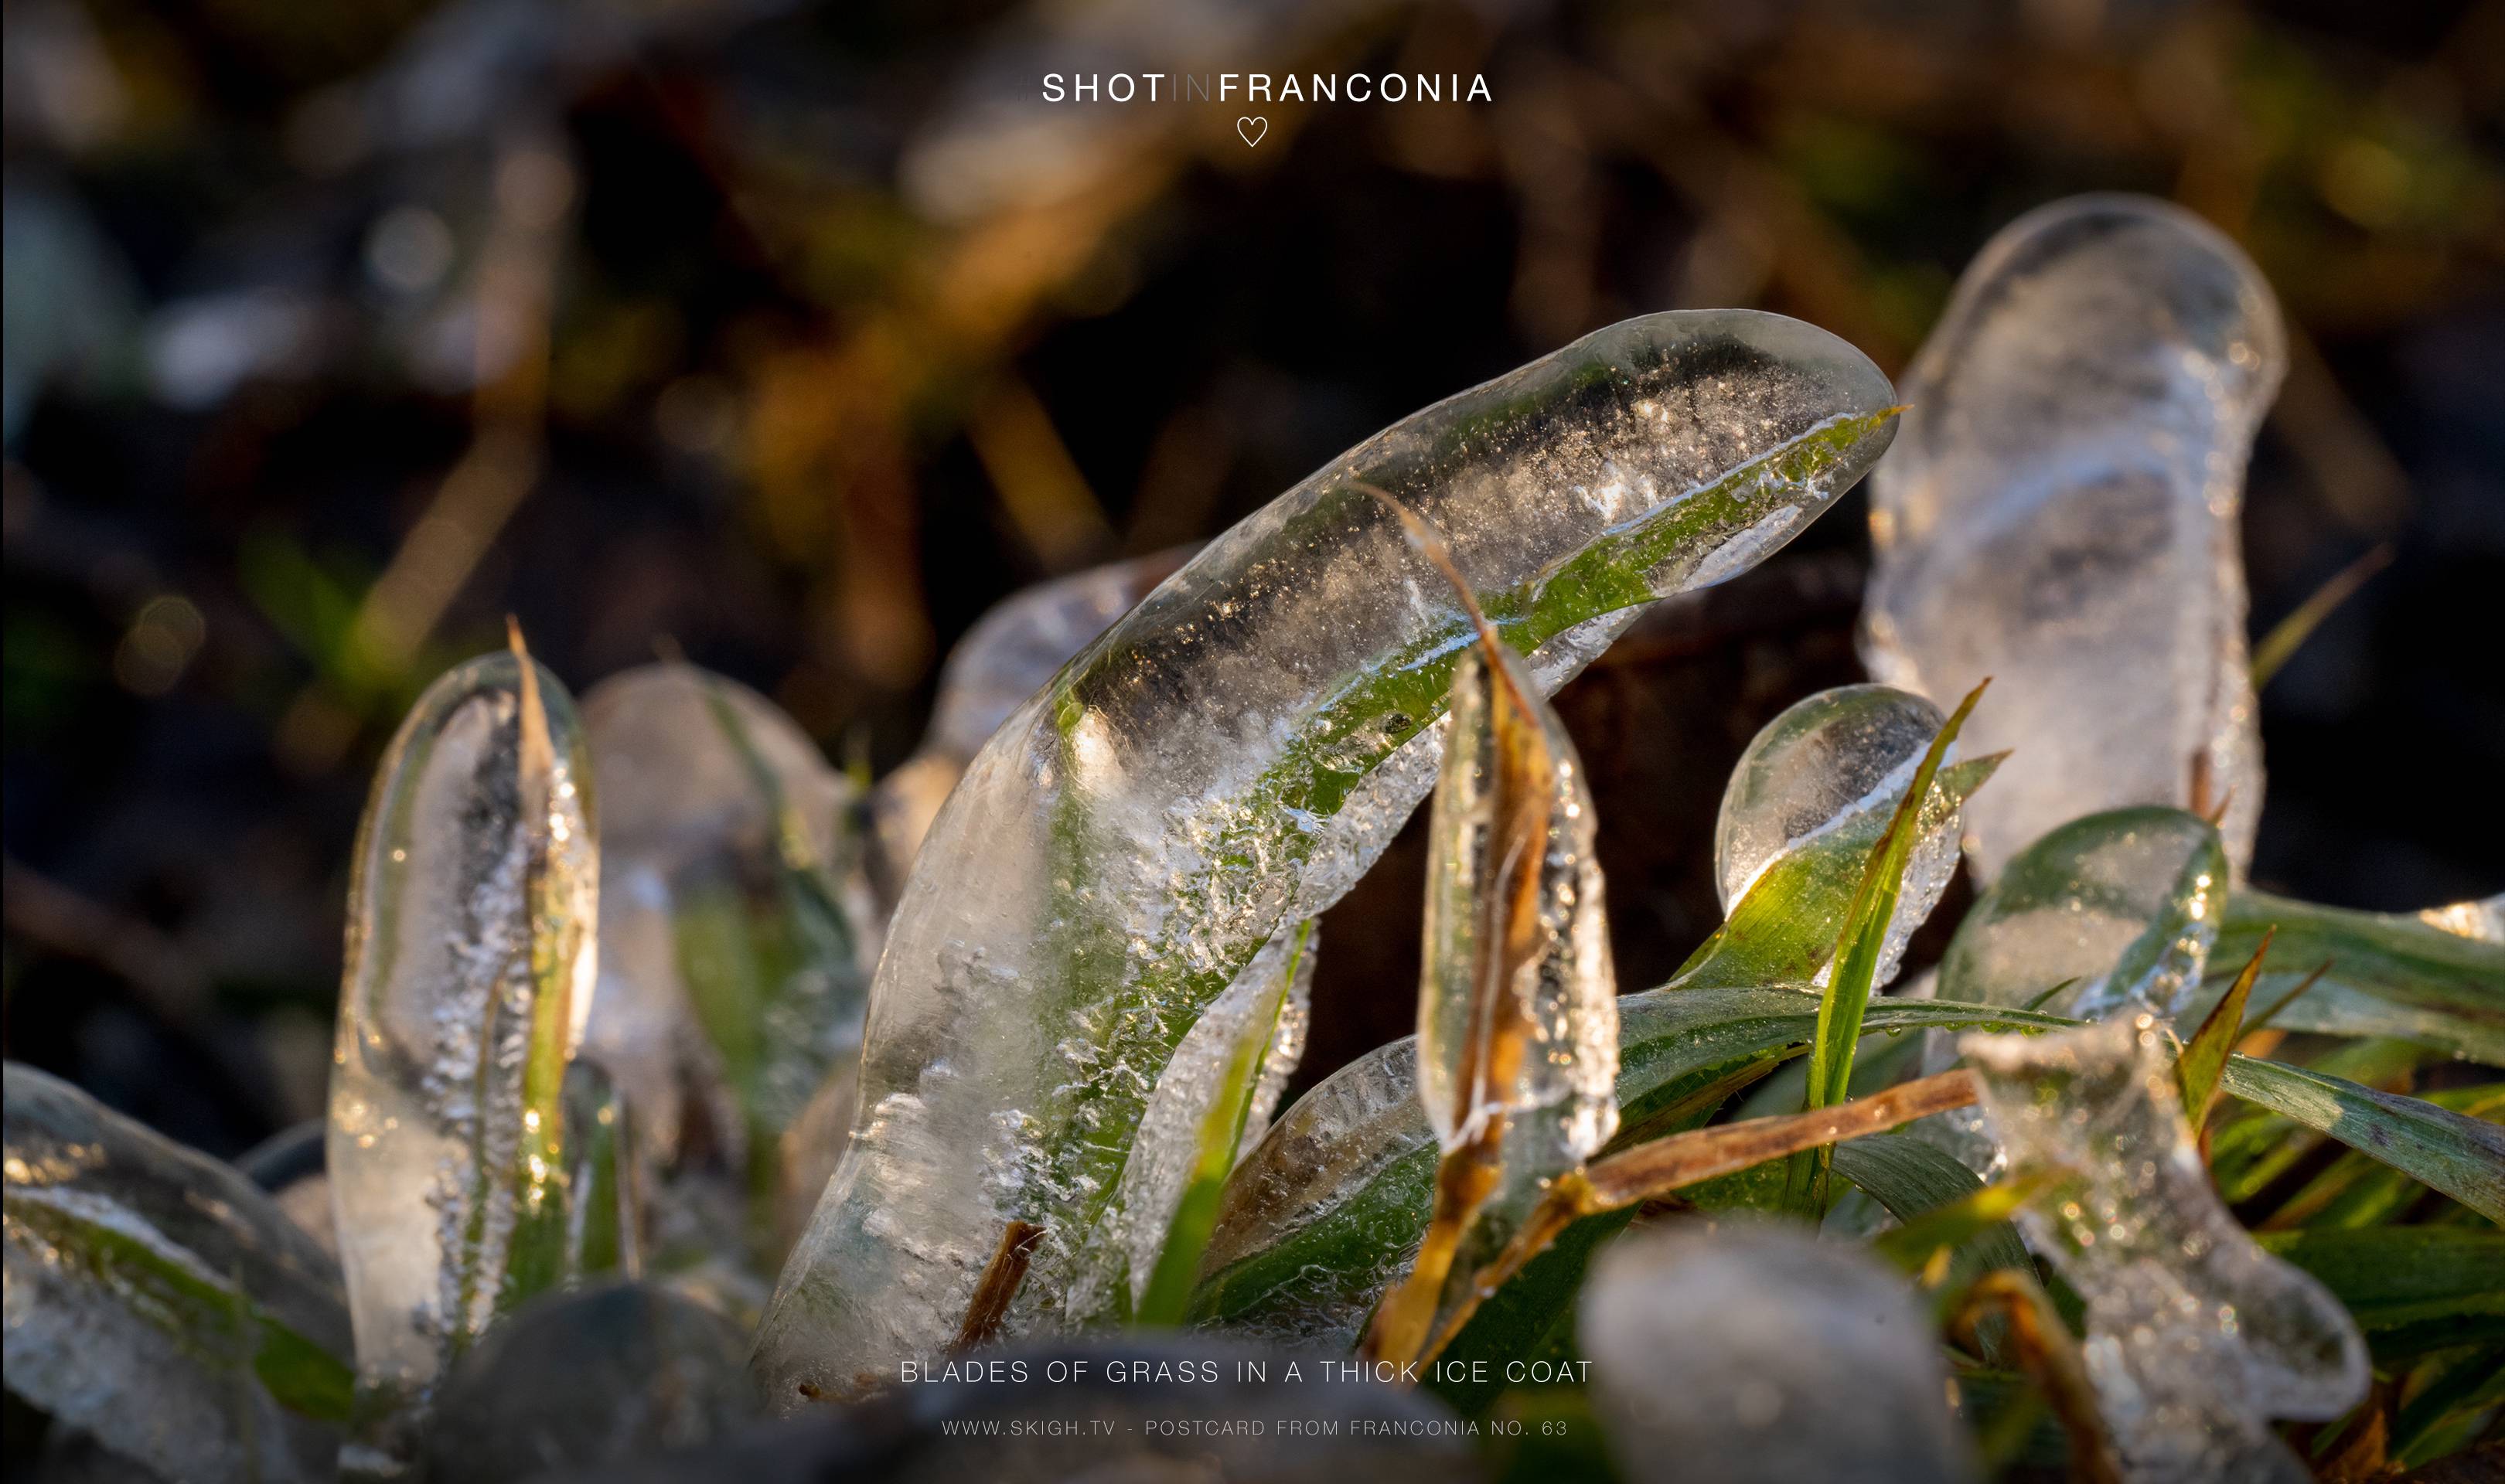 Blades of grass in a thick ice coat